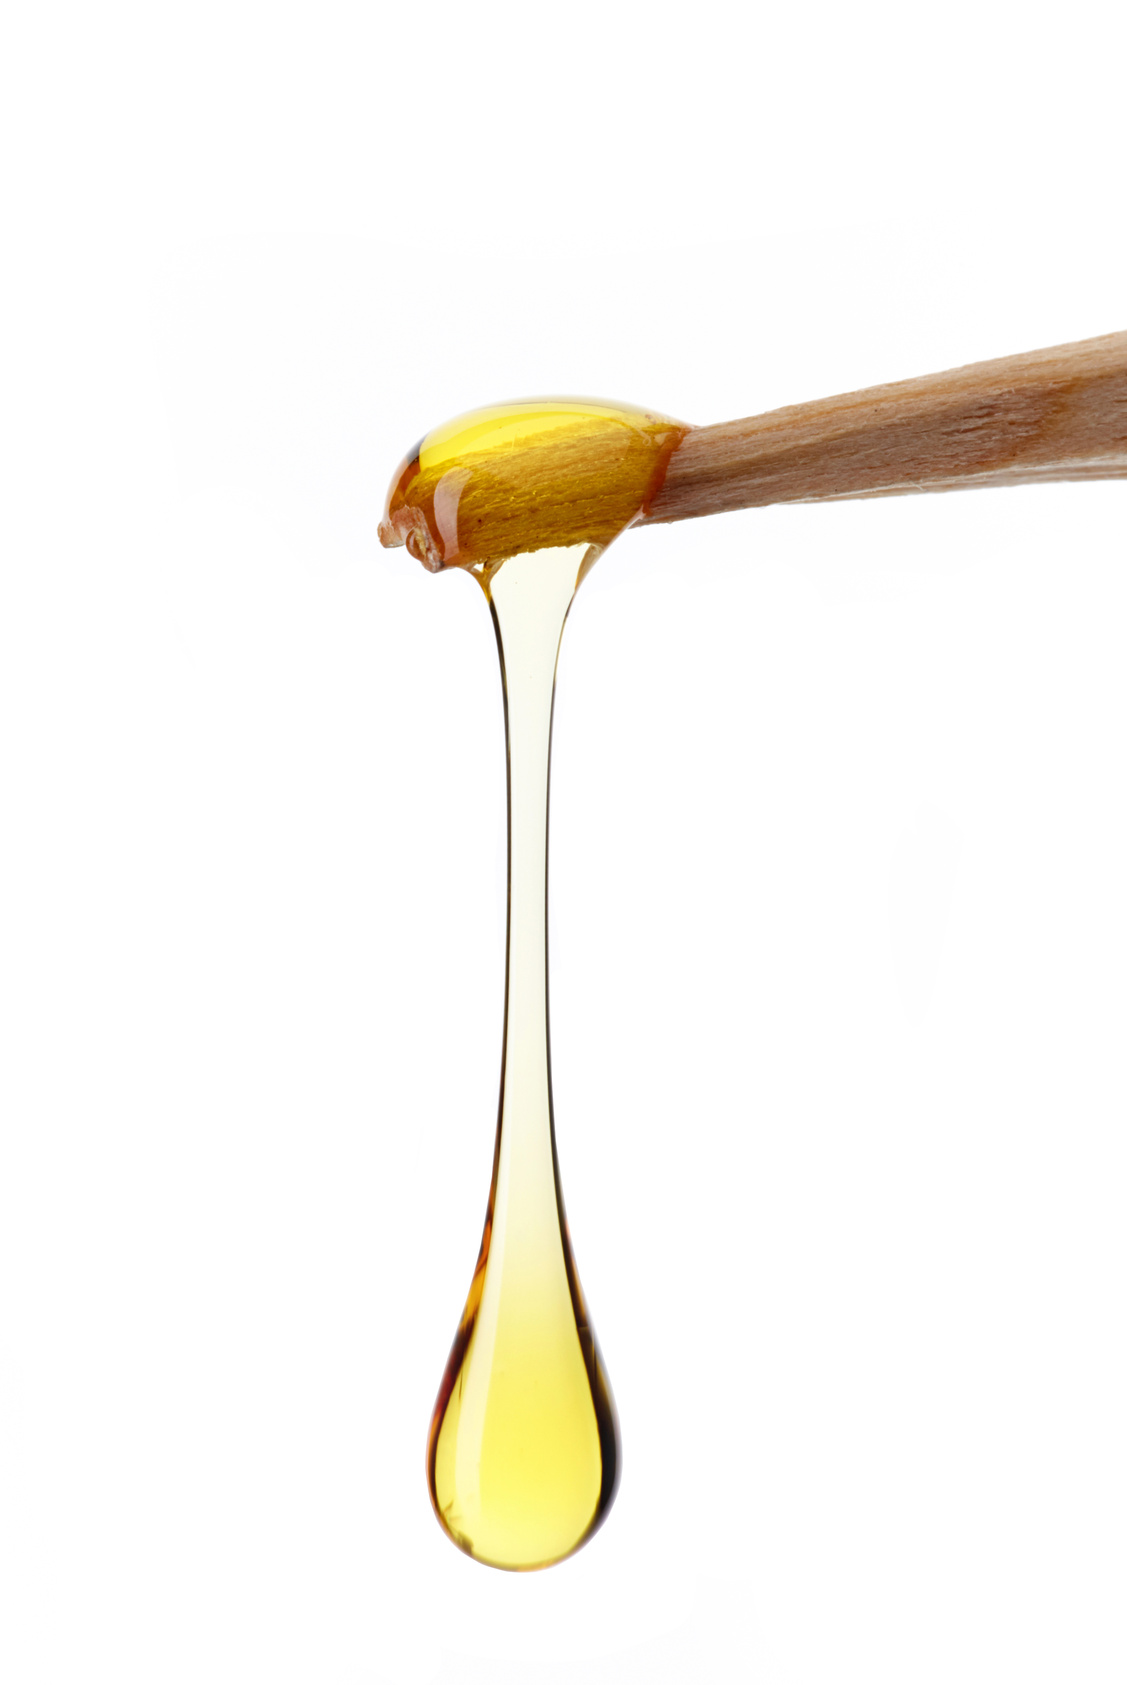 drop of honey on a white background